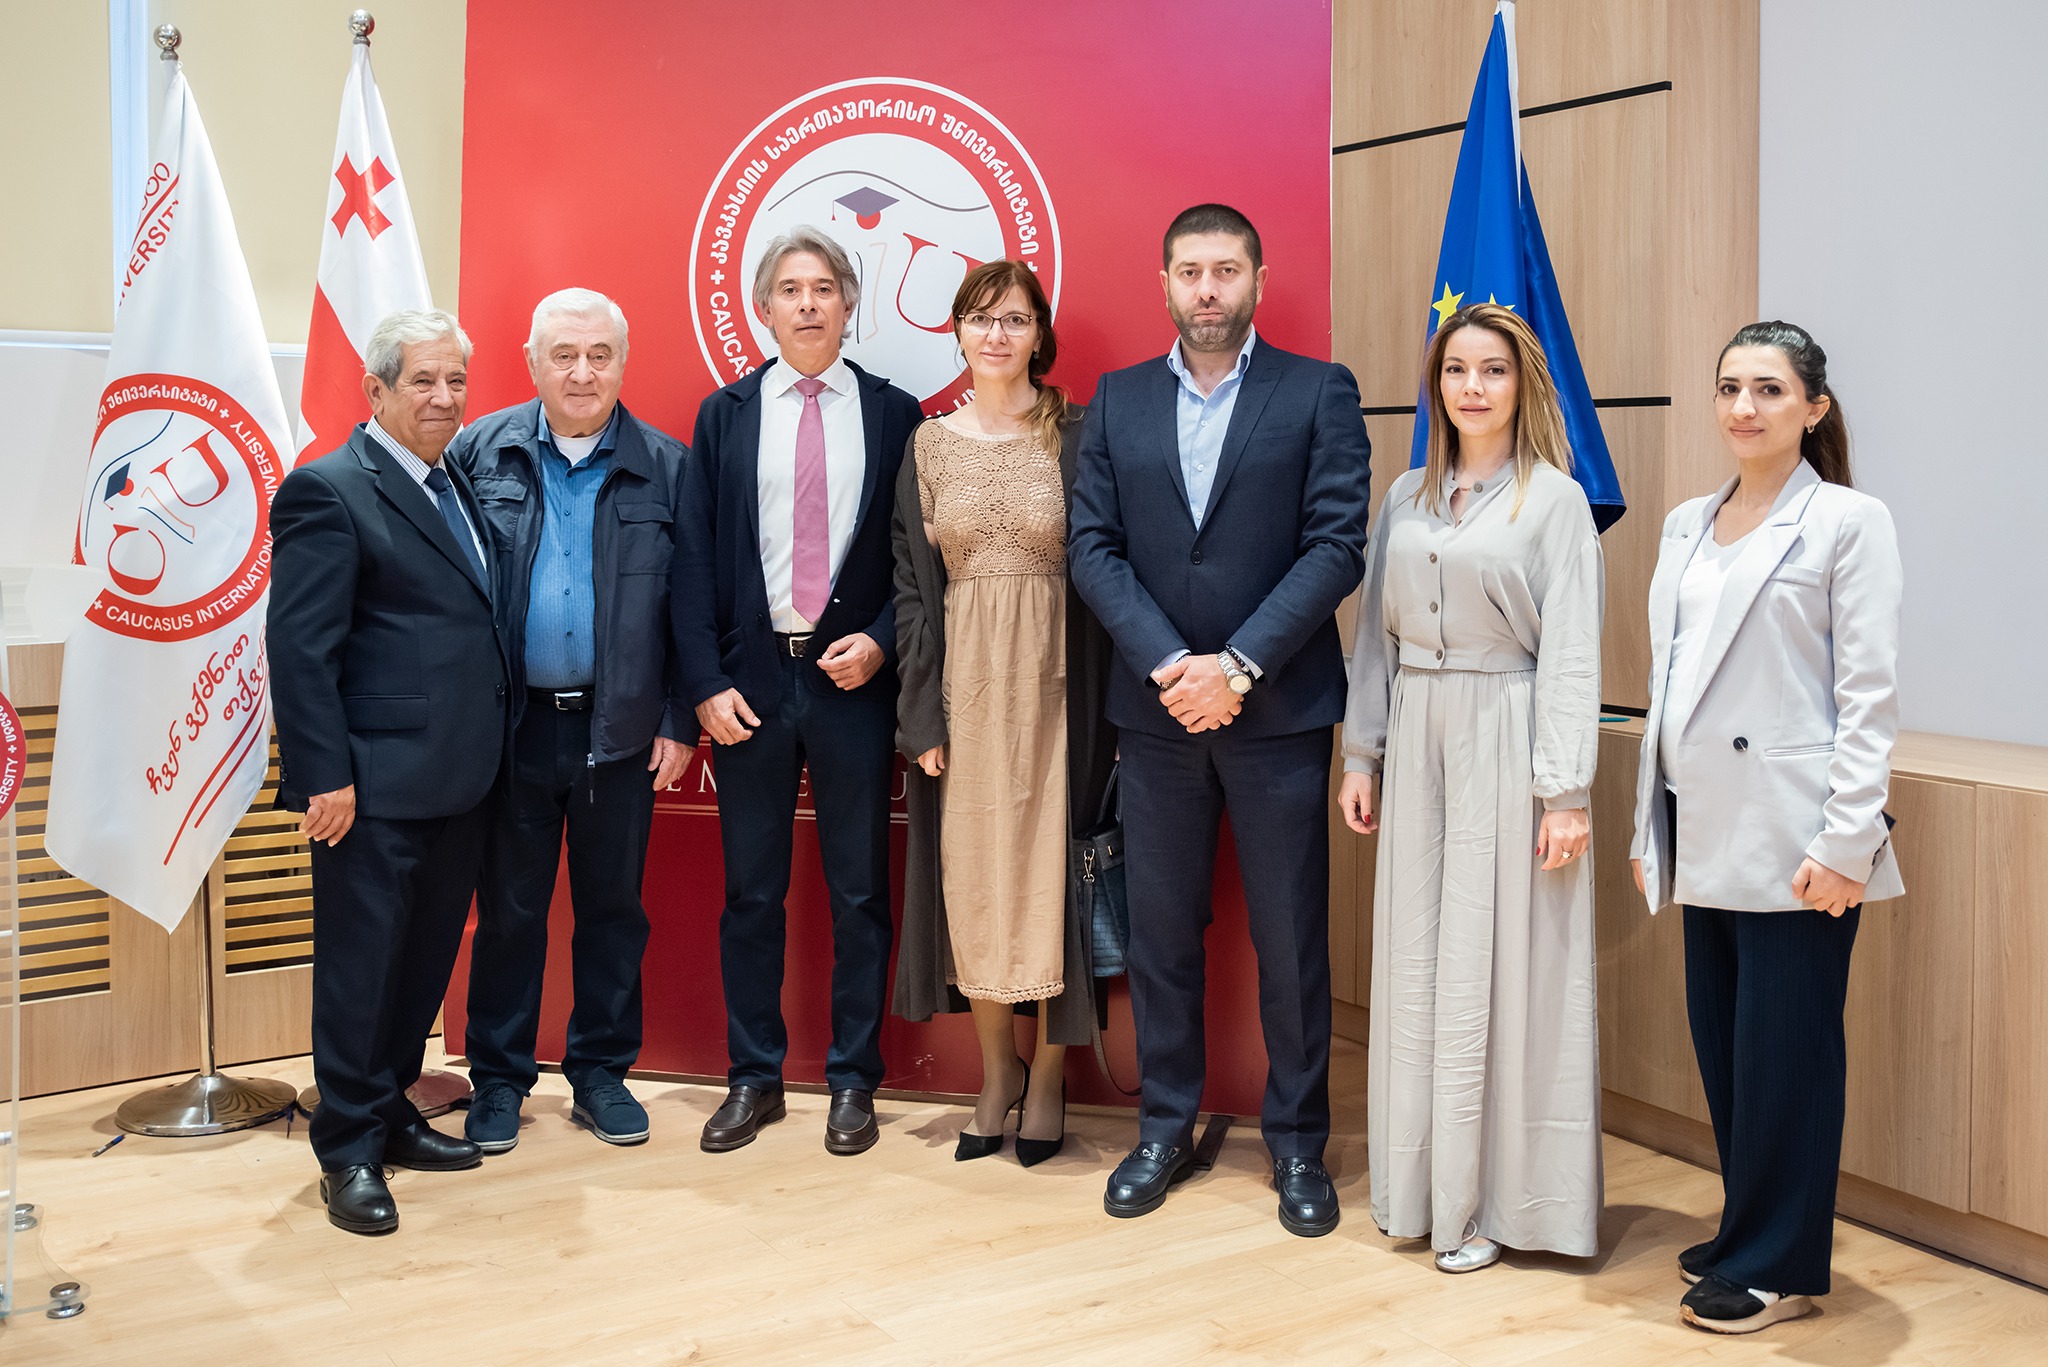 President of the Global Wine Tourism Organization Visited CIU